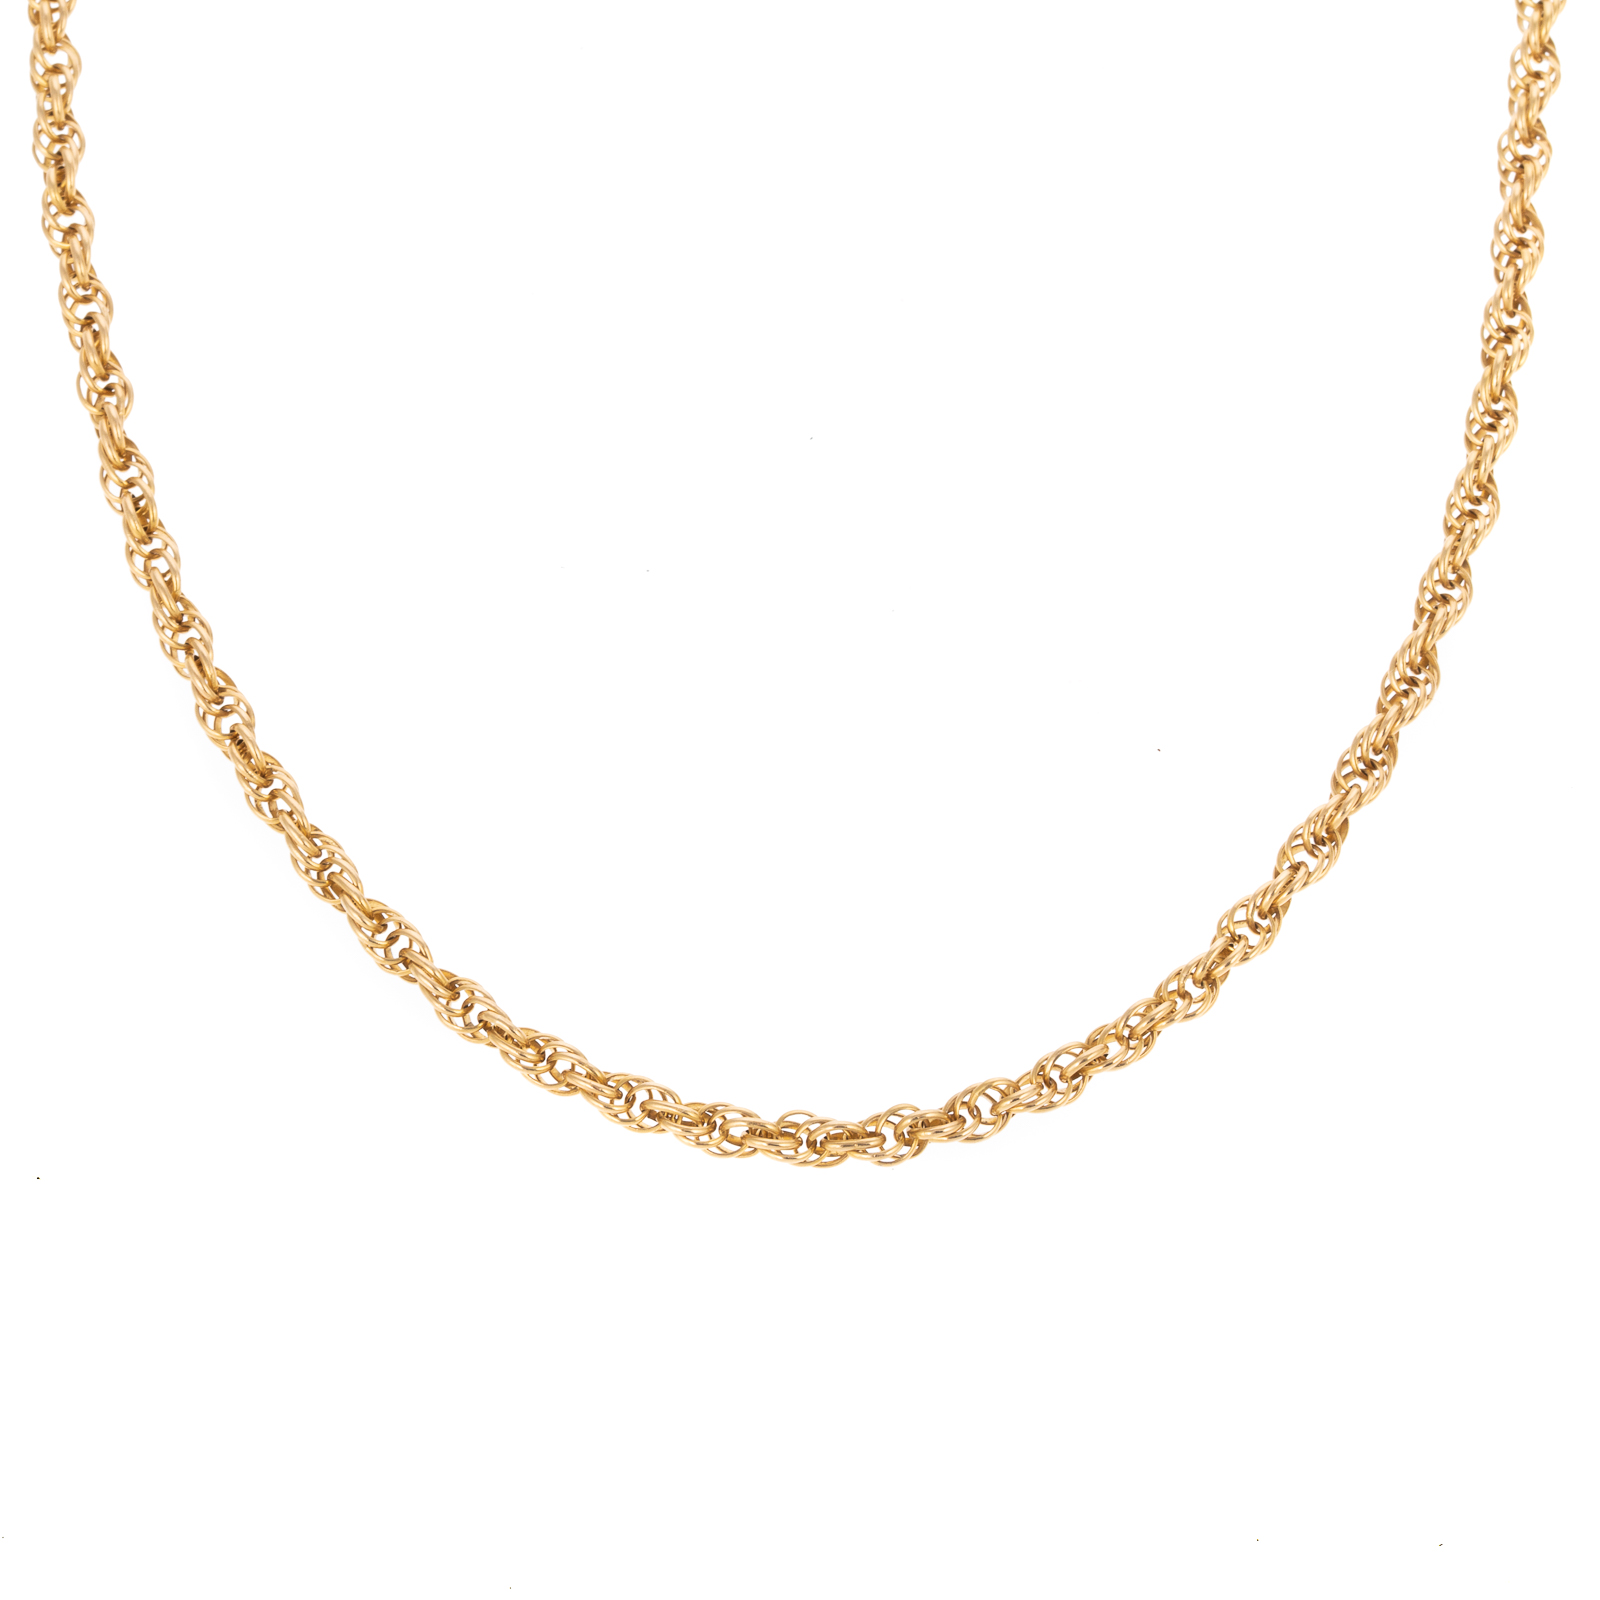 A 14K YELLOW GOLD TWISTED ROPE